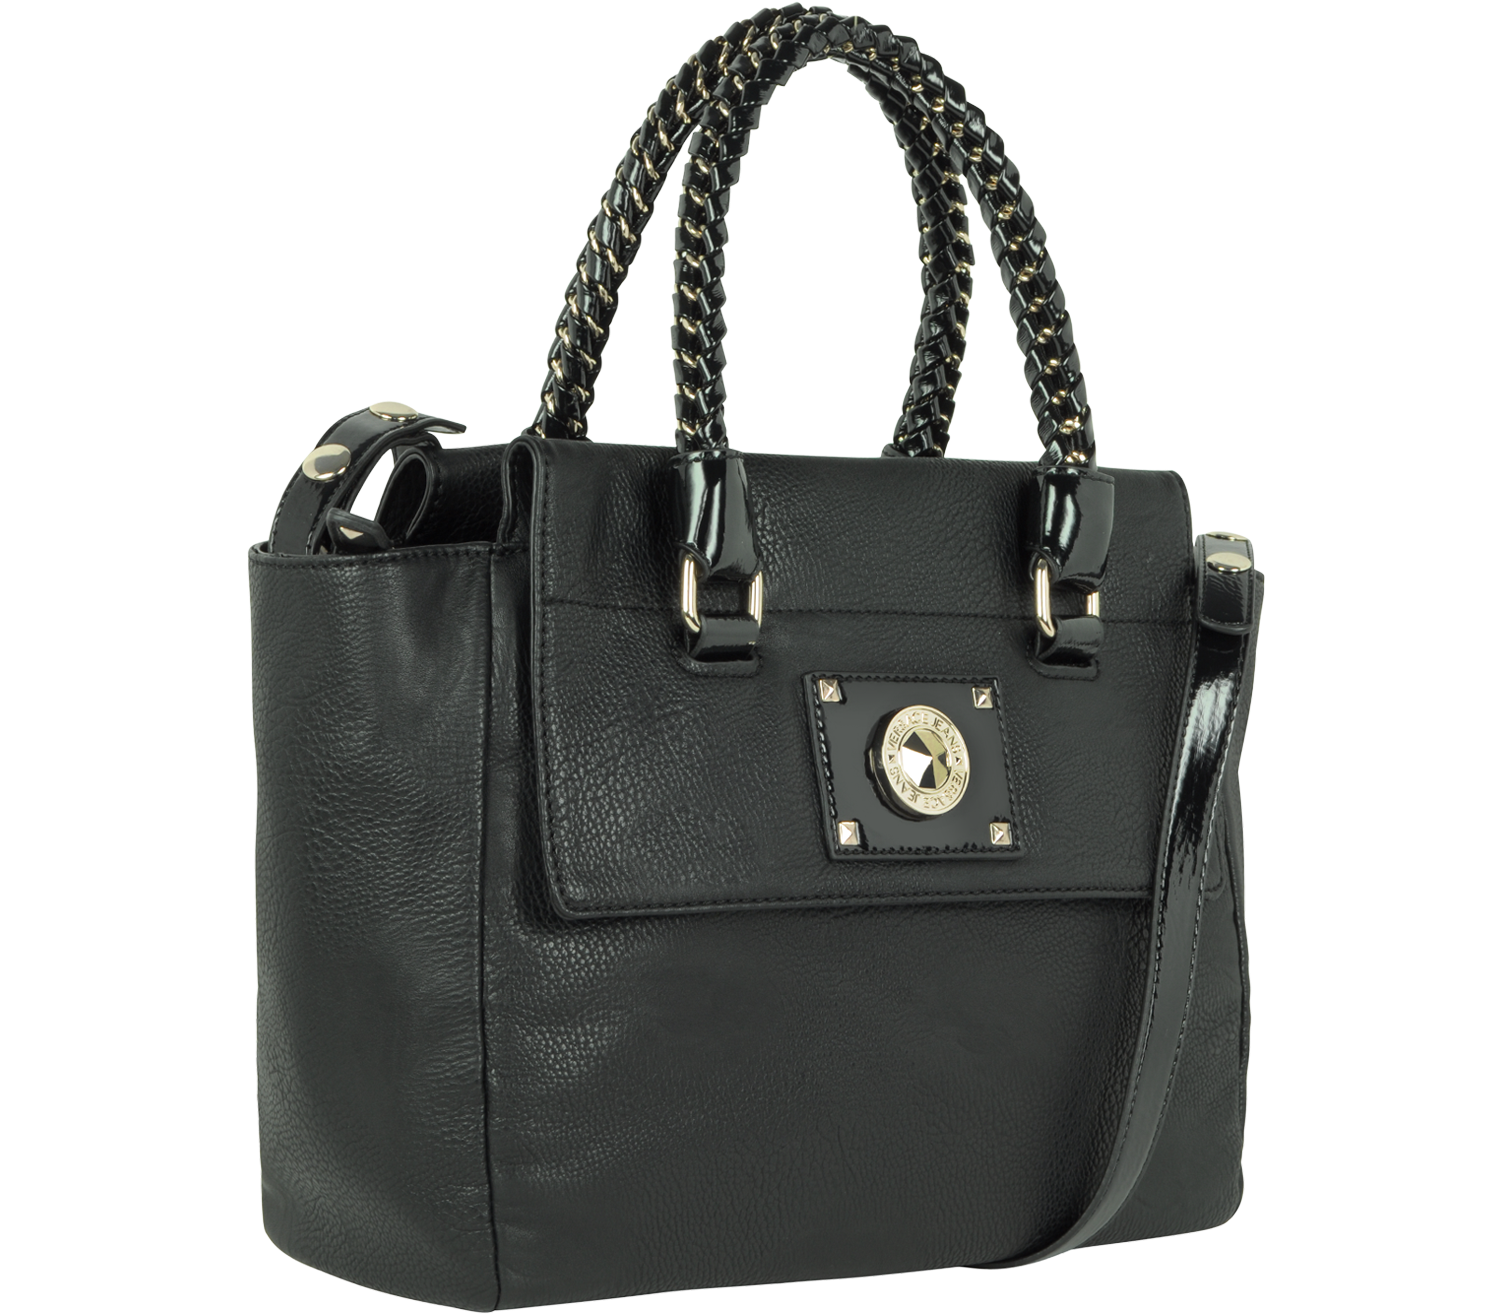 Versace Versace Jeans - Black Eco Leather Tote at FORZIERI Australia